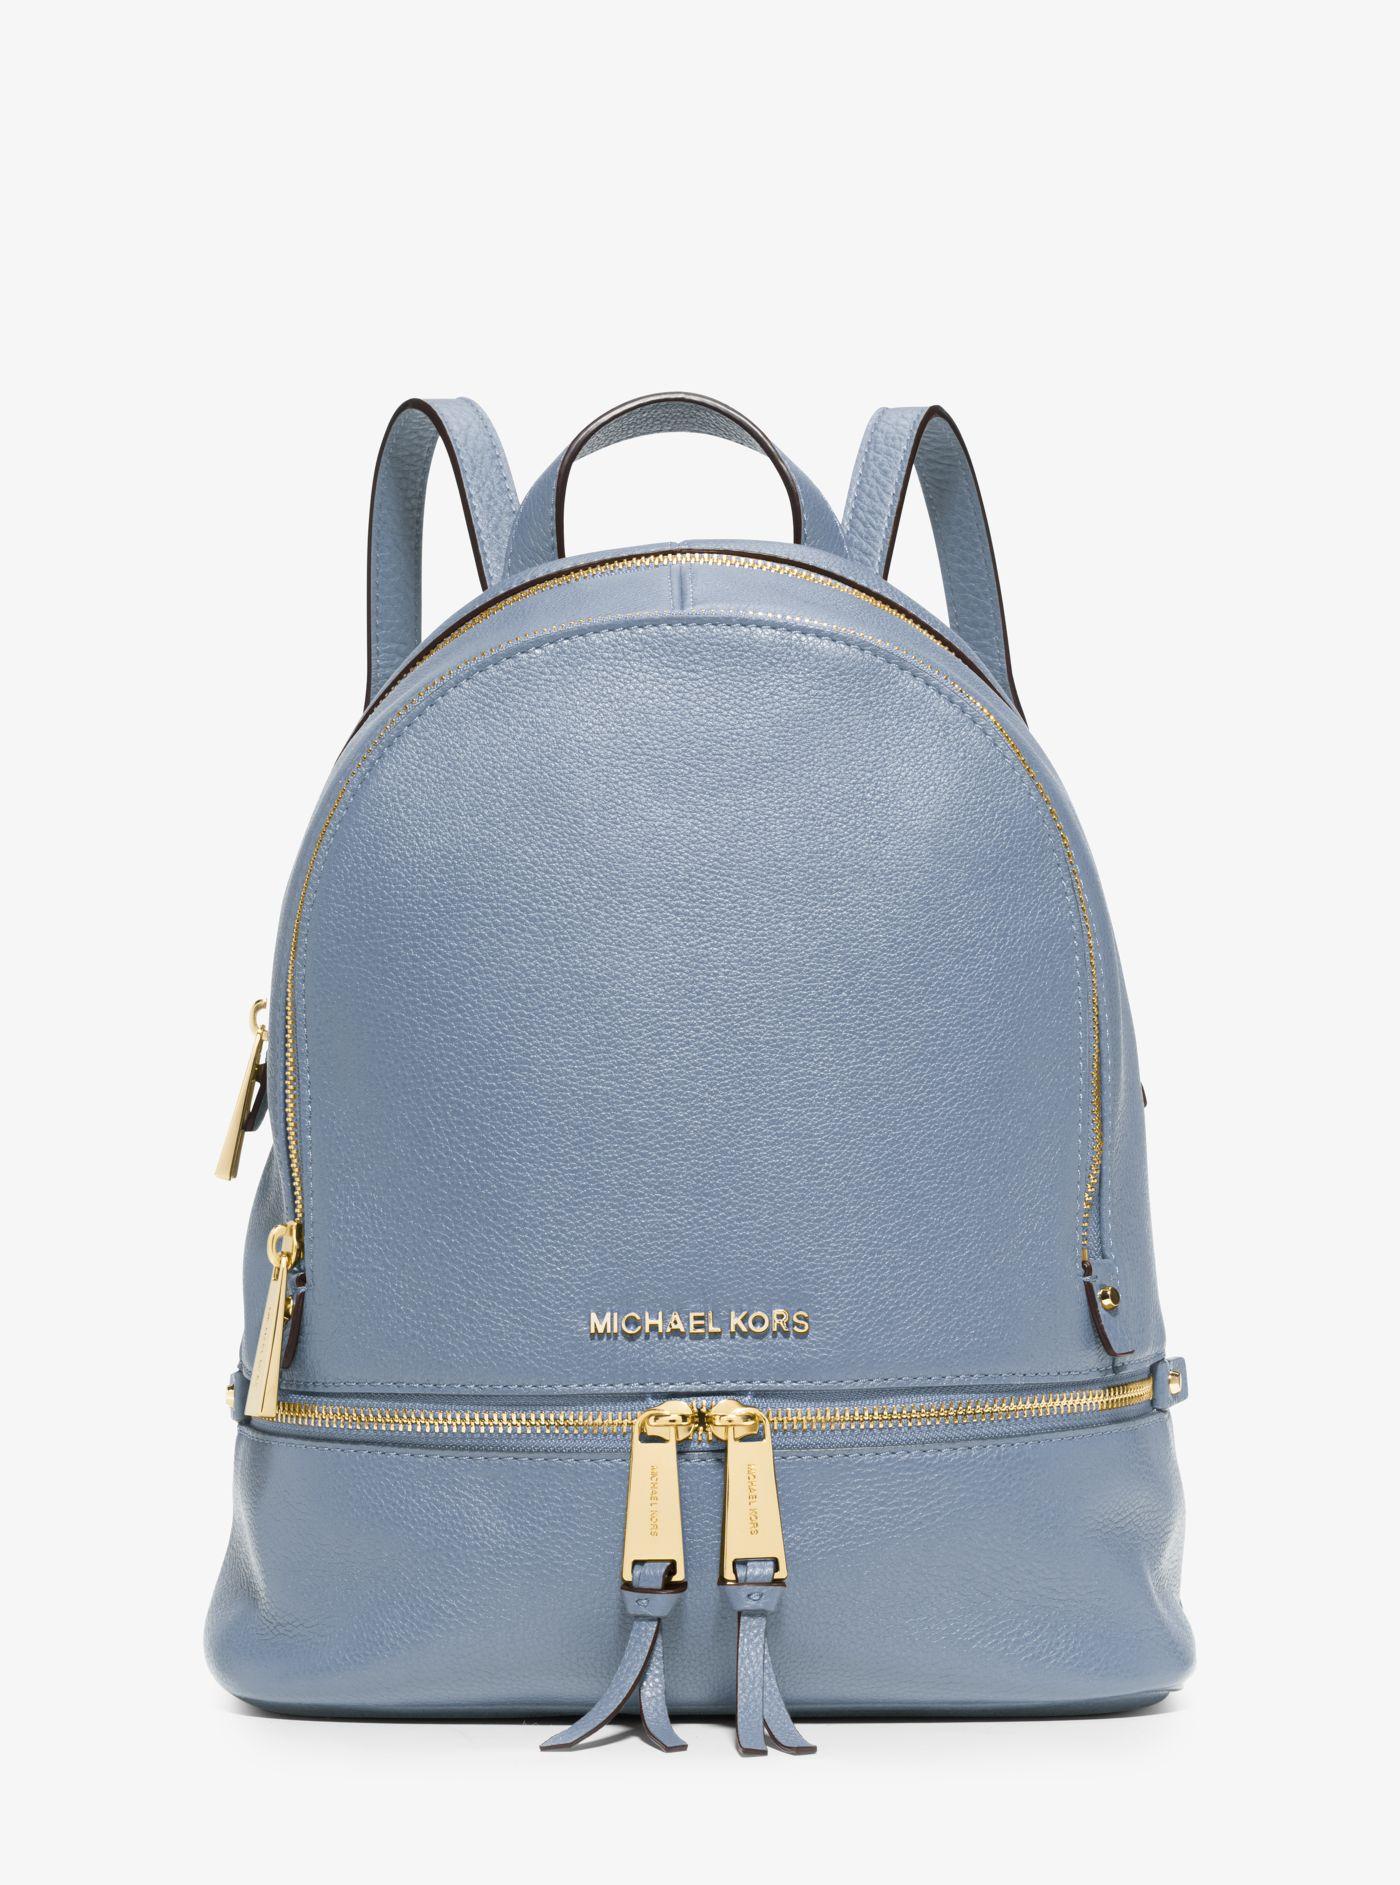 Michael Kors Rhea Small Leather Backpack in Blue | Lyst